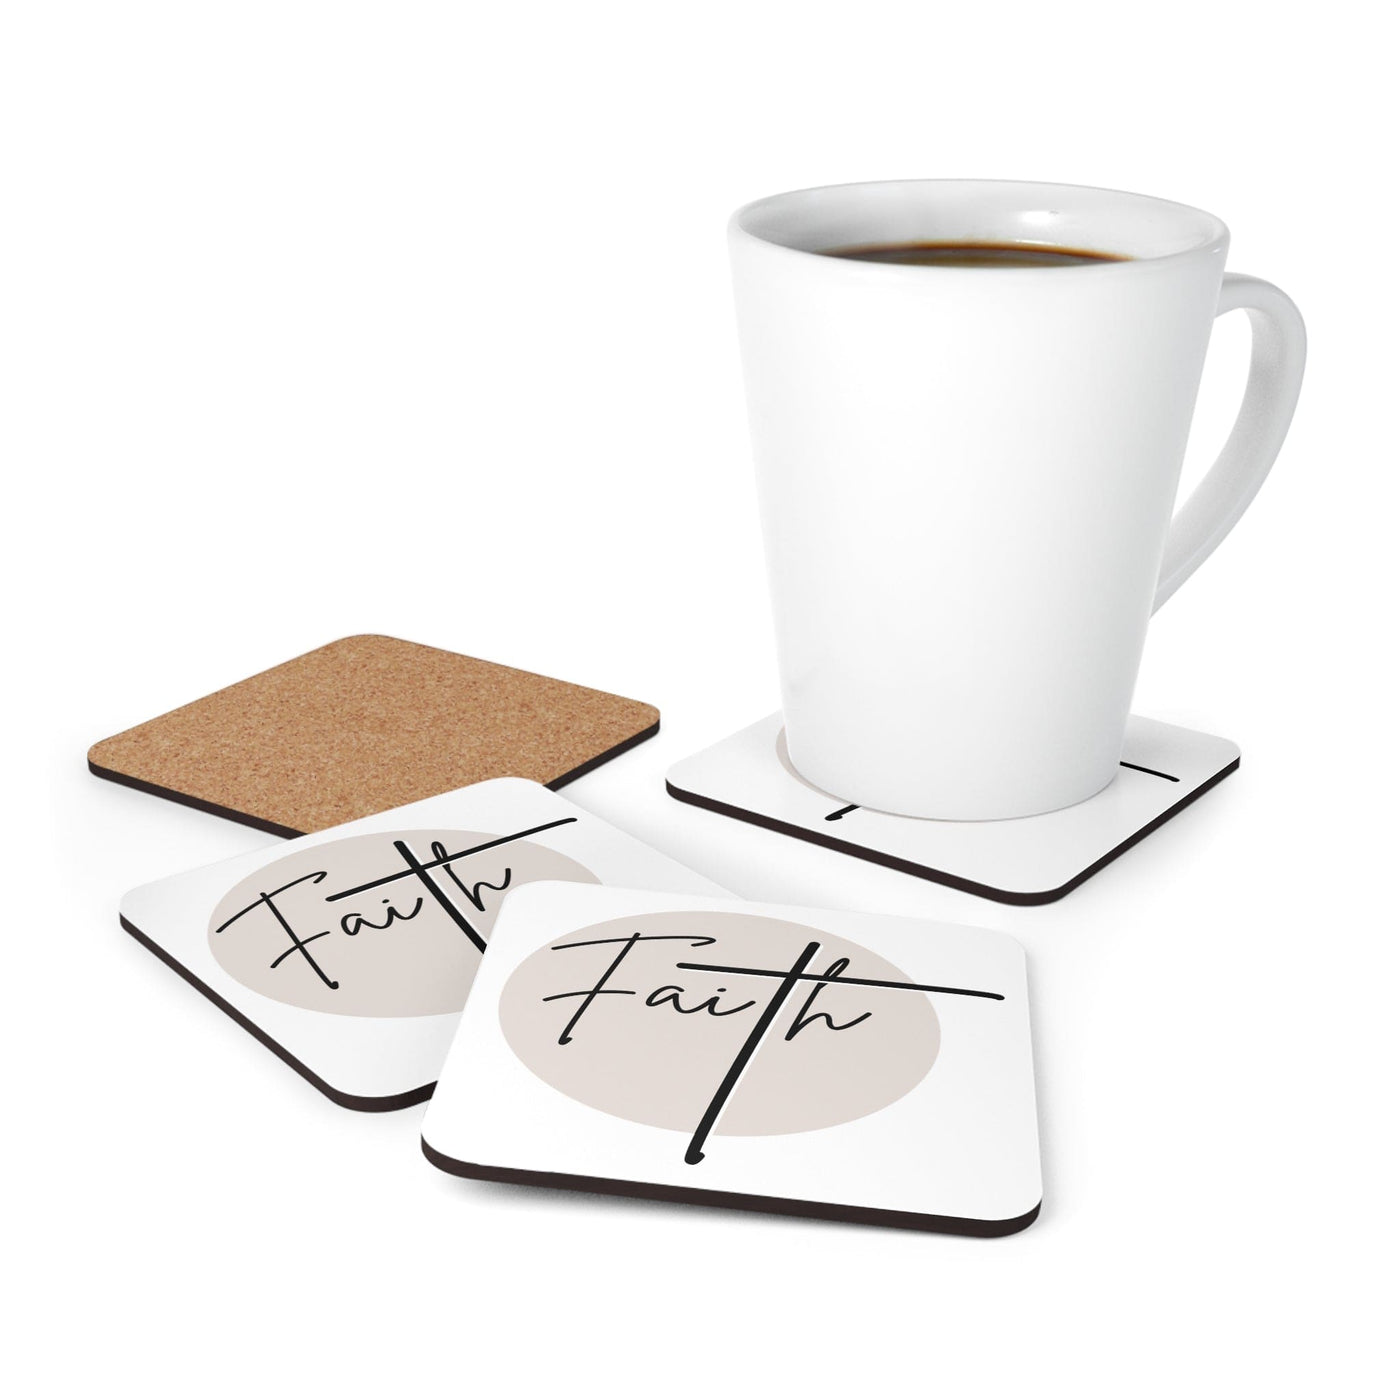 Coaster Set Of 4 For Drinks Faith - Christian Affirmation Black And Beige